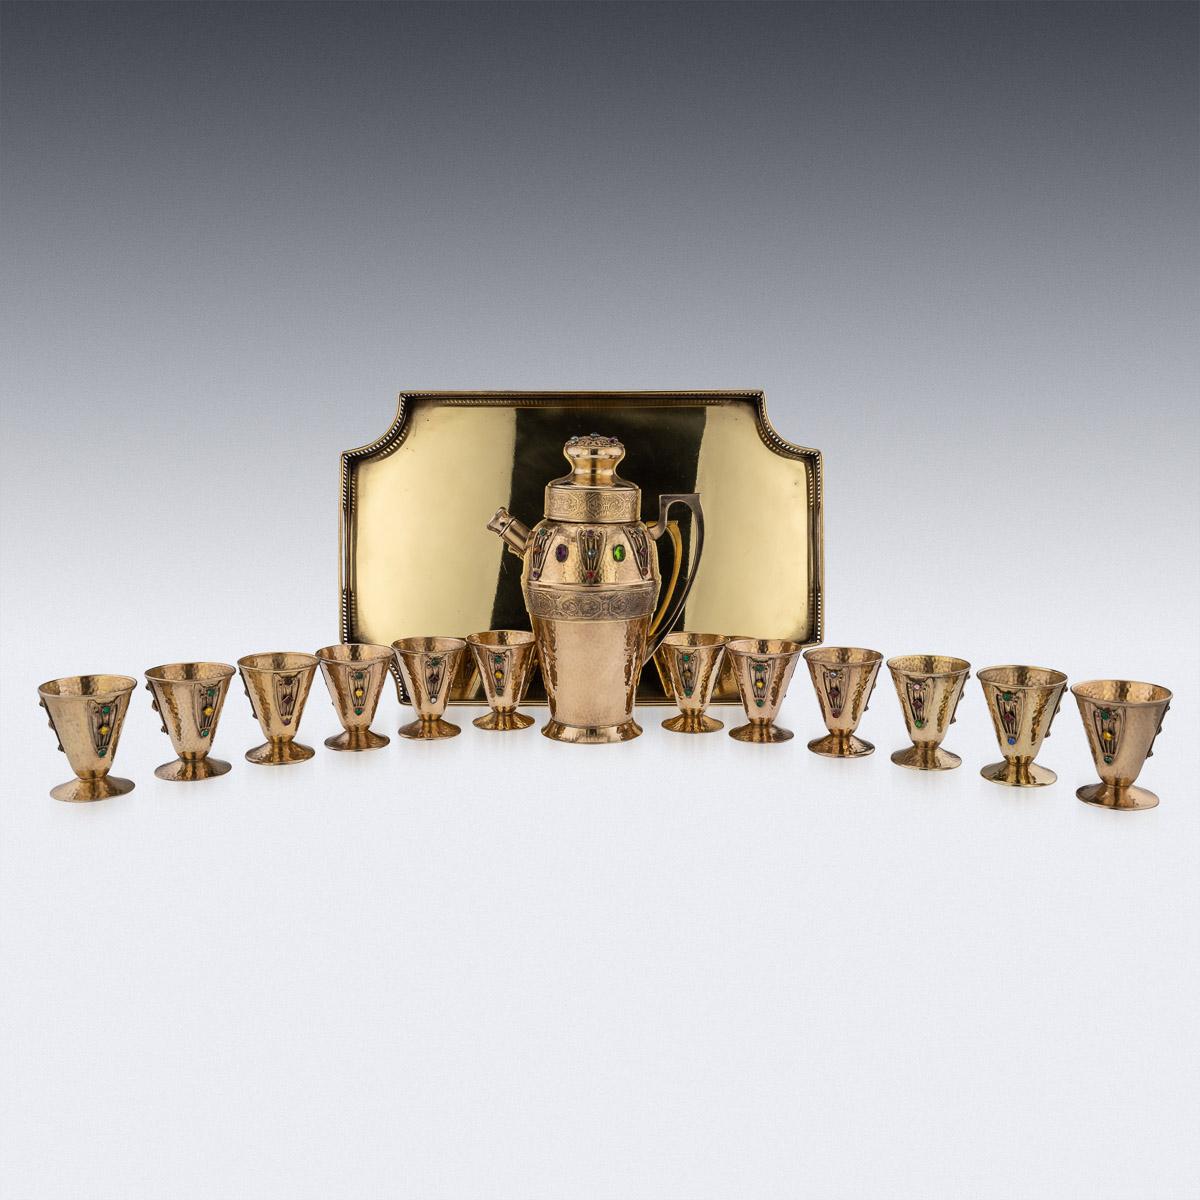 20th Century American Jugandstil richly gilded on copper cocktail shaker with twelve goblets on tray. Made in a very unusual and distinctive style called Jugendstil (